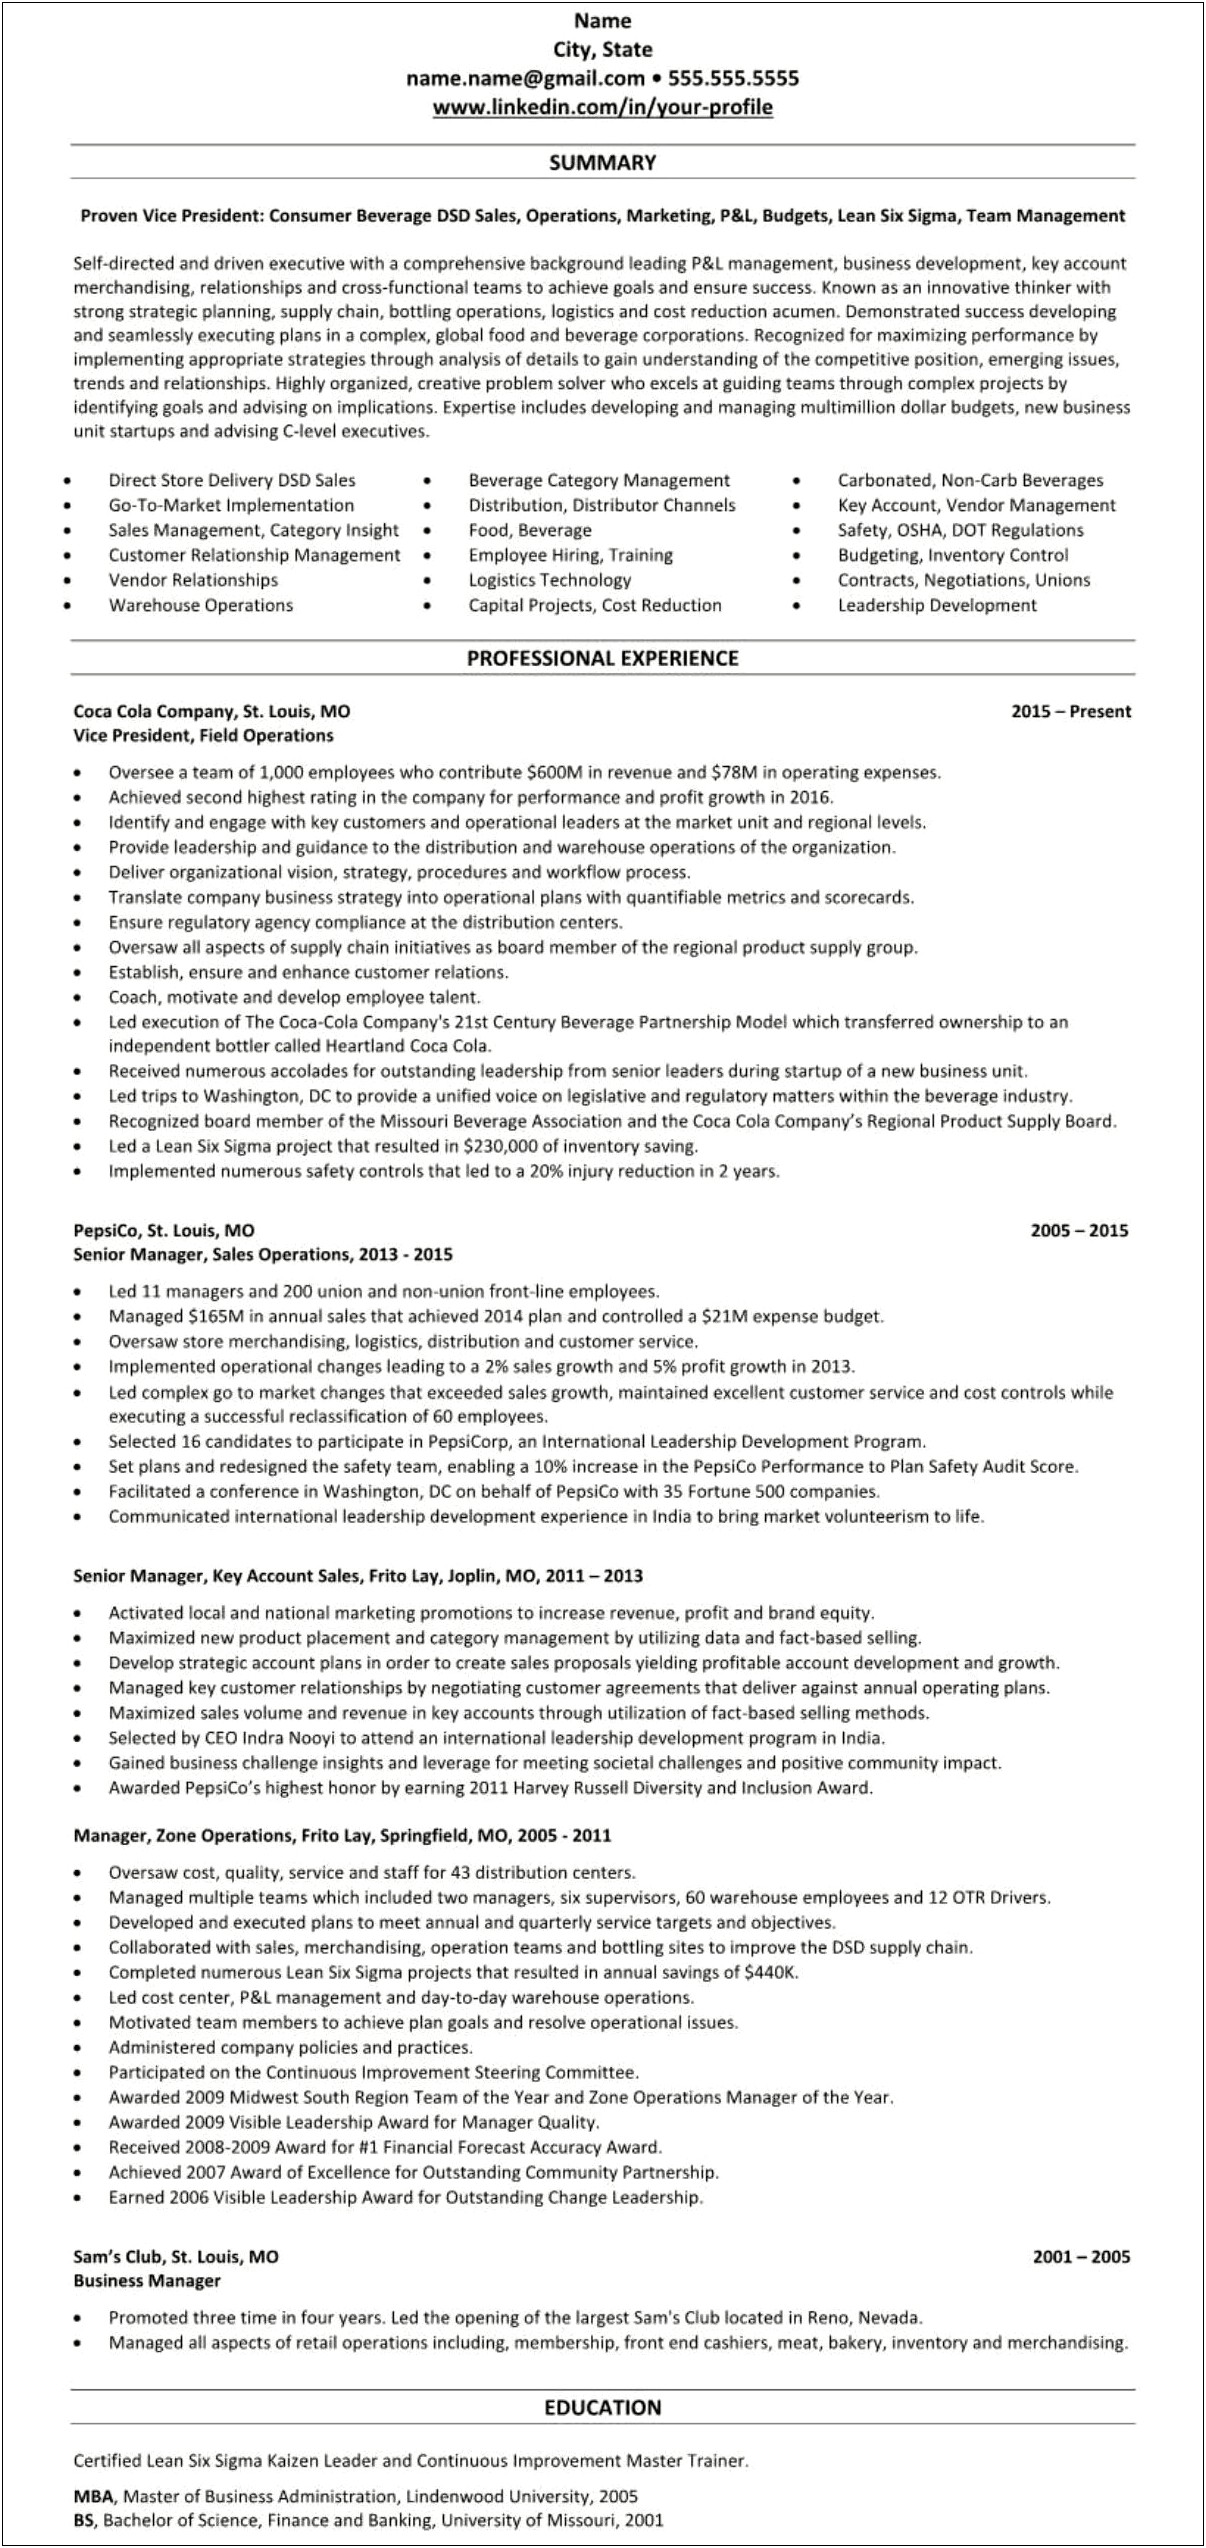 Professional Summary For Resume For Restaurant Manager